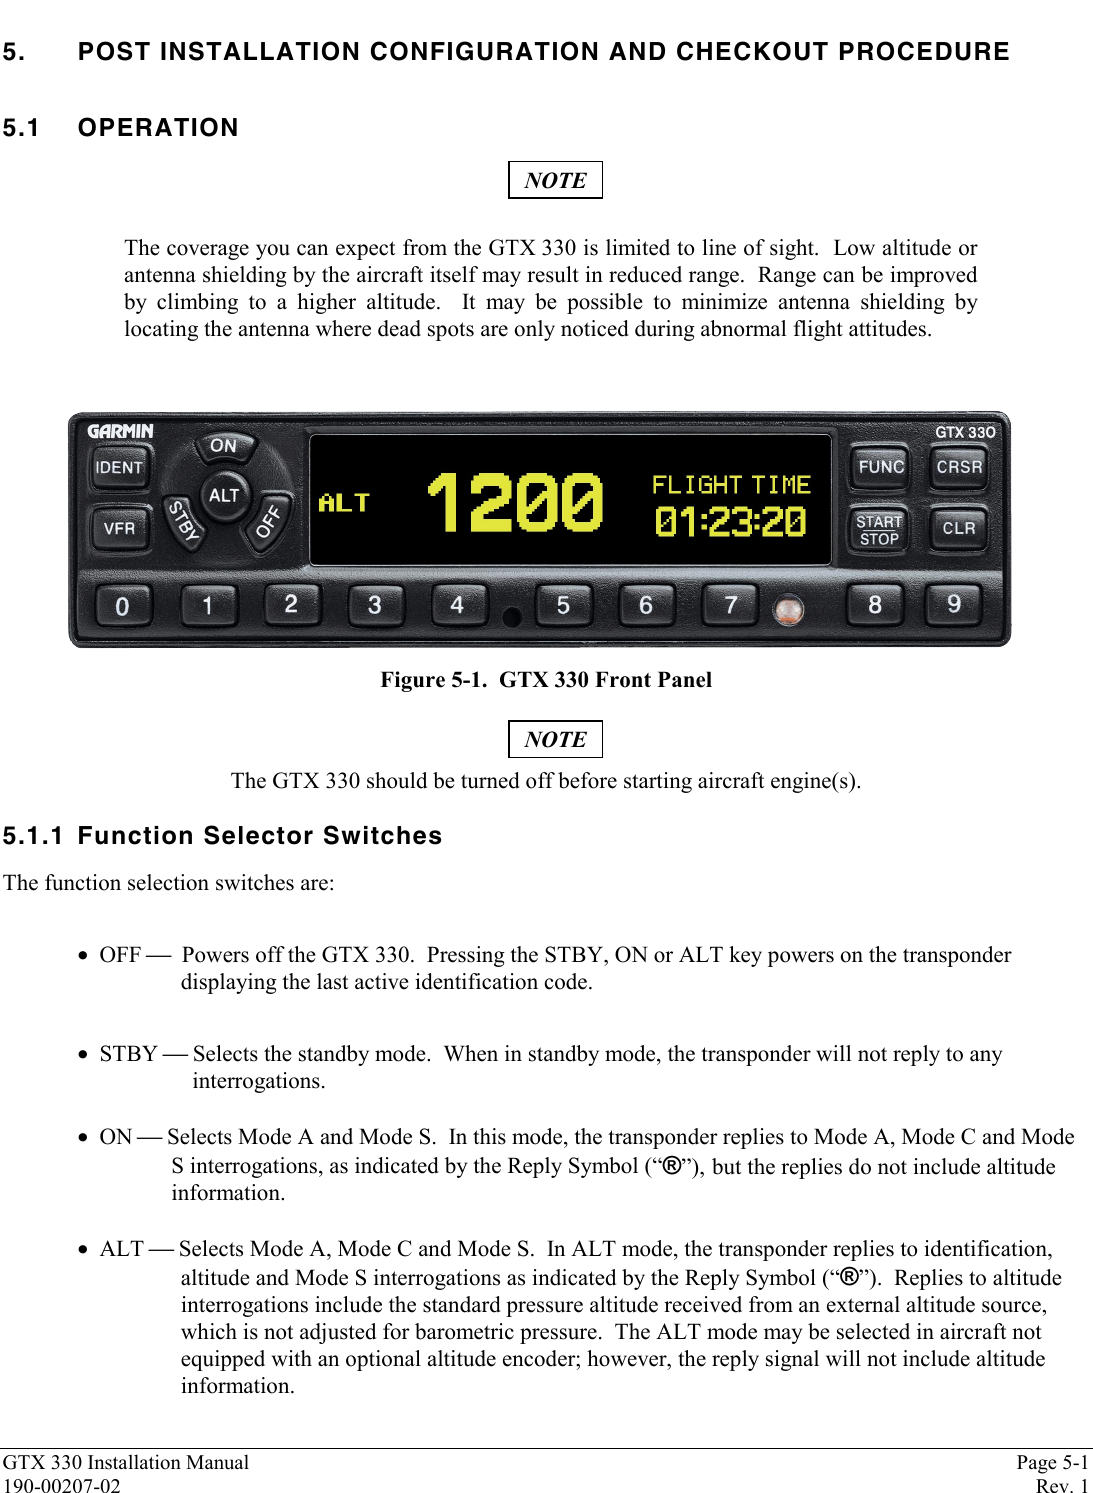 GTX 330 Installation Manual Page 5-1190-00207-02 Rev. 15. POST INSTALLATION CONFIGURATION AND CHECKOUT PROCEDURE5.1 OPERATIONNOTEThe coverage you can expect from the GTX 330 is limited to line of sight.  Low altitude orantenna shielding by the aircraft itself may result in reduced range.  Range can be improvedby climbing to a higher altitude.  It may be possible to minimize antenna shielding bylocating the antenna where dead spots are only noticed during abnormal flight attitudes.Figure 5-1.  GTX 330 Front PanelNOTEThe GTX 330 should be turned off before starting aircraft engine(s).5.1.1 Function Selector SwitchesThe function selection switches are:•  OFF   Powers off the GTX 330.  Pressing the STBY, ON or ALT key powers on the transponderdisplaying the last active identification code.•  STBY  Selects the standby mode.  When in standby mode, the transponder will not reply to any  interrogations.•  ON  Selects Mode A and Mode S.  In this mode, the transponder replies to Mode A, Mode C and ModeS interrogations, as indicated by the Reply Symbol (“®”), but the replies do not include altitudeinformation.•  ALT  Selects Mode A, Mode C and Mode S.  In ALT mode, the transponder replies to identification,altitude and Mode S interrogations as indicated by the Reply Symbol (“®”).  Replies to altitudeinterrogations include the standard pressure altitude received from an external altitude source,which is not adjusted for barometric pressure.  The ALT mode may be selected in aircraft notequipped with an optional altitude encoder; however, the reply signal will not include altitudeinformation.